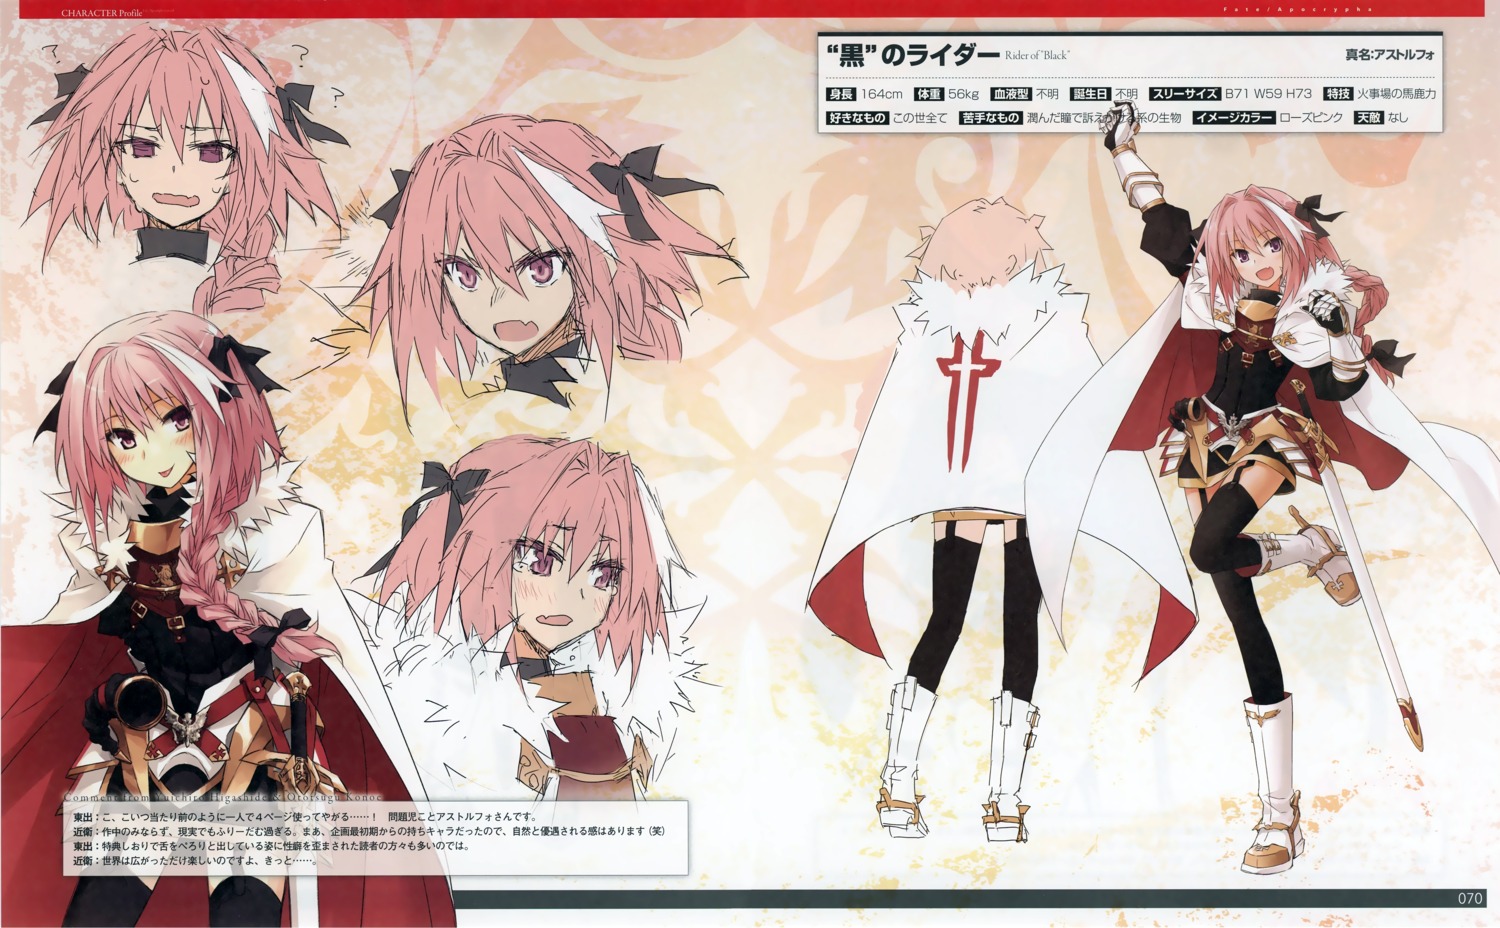 armor astolfo_(fate) character_design expression fate/apocrypha fate/stay_night konoe_ototsugu profile_page stockings sword thighhighs trap type-moon